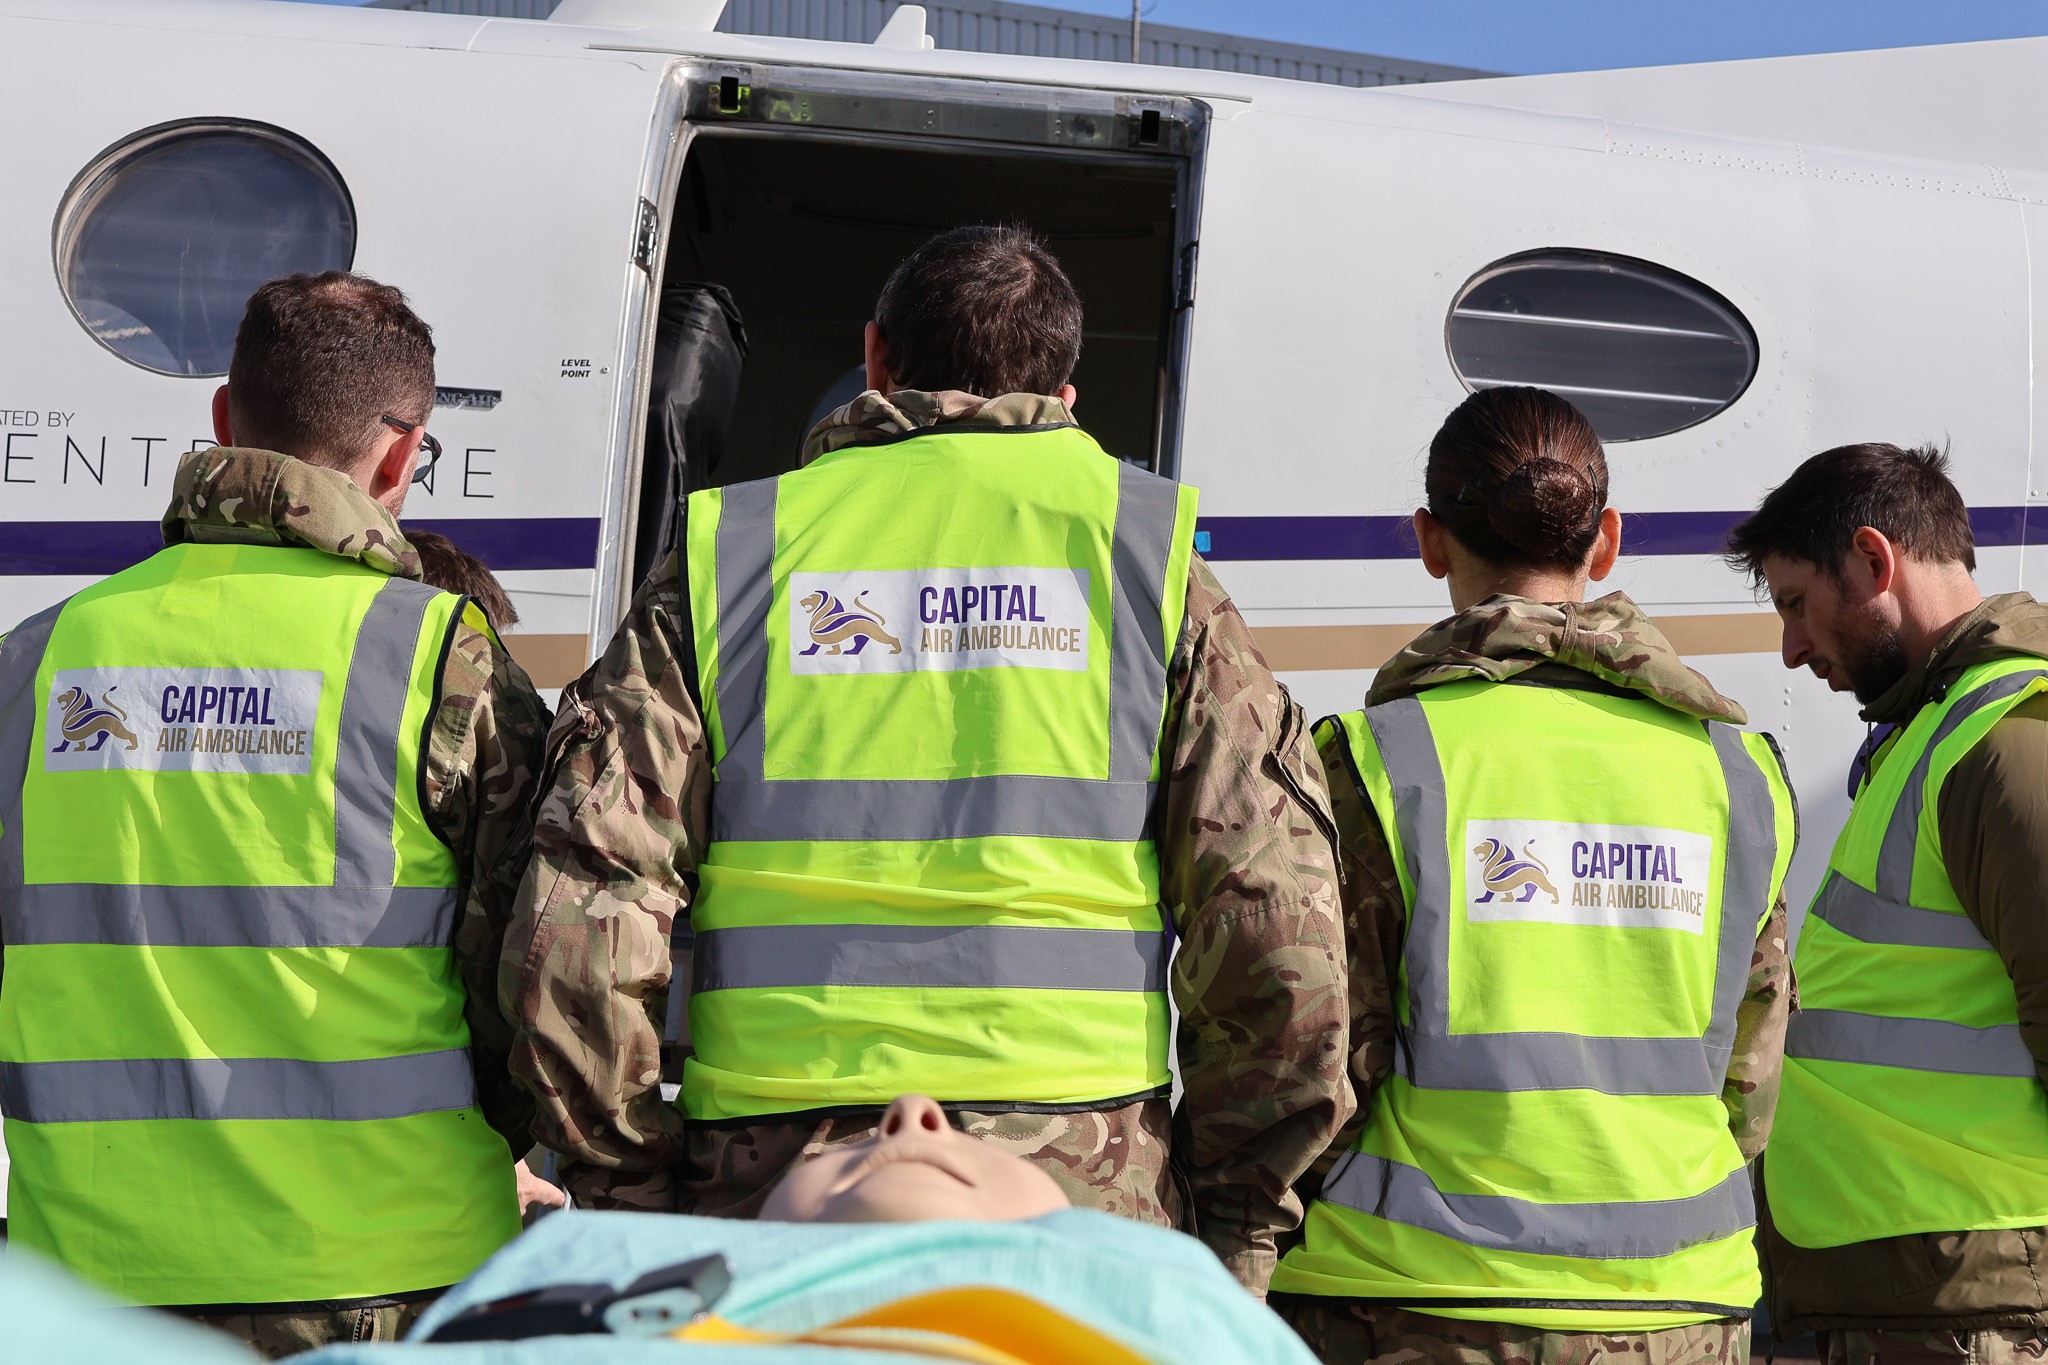 Tactical Medical Wing (TMW) are keeping their life saving medical skills up to date through a partnership with Capital Air Ambulance, who provide rapid UK aeromedical services similar to TMW.